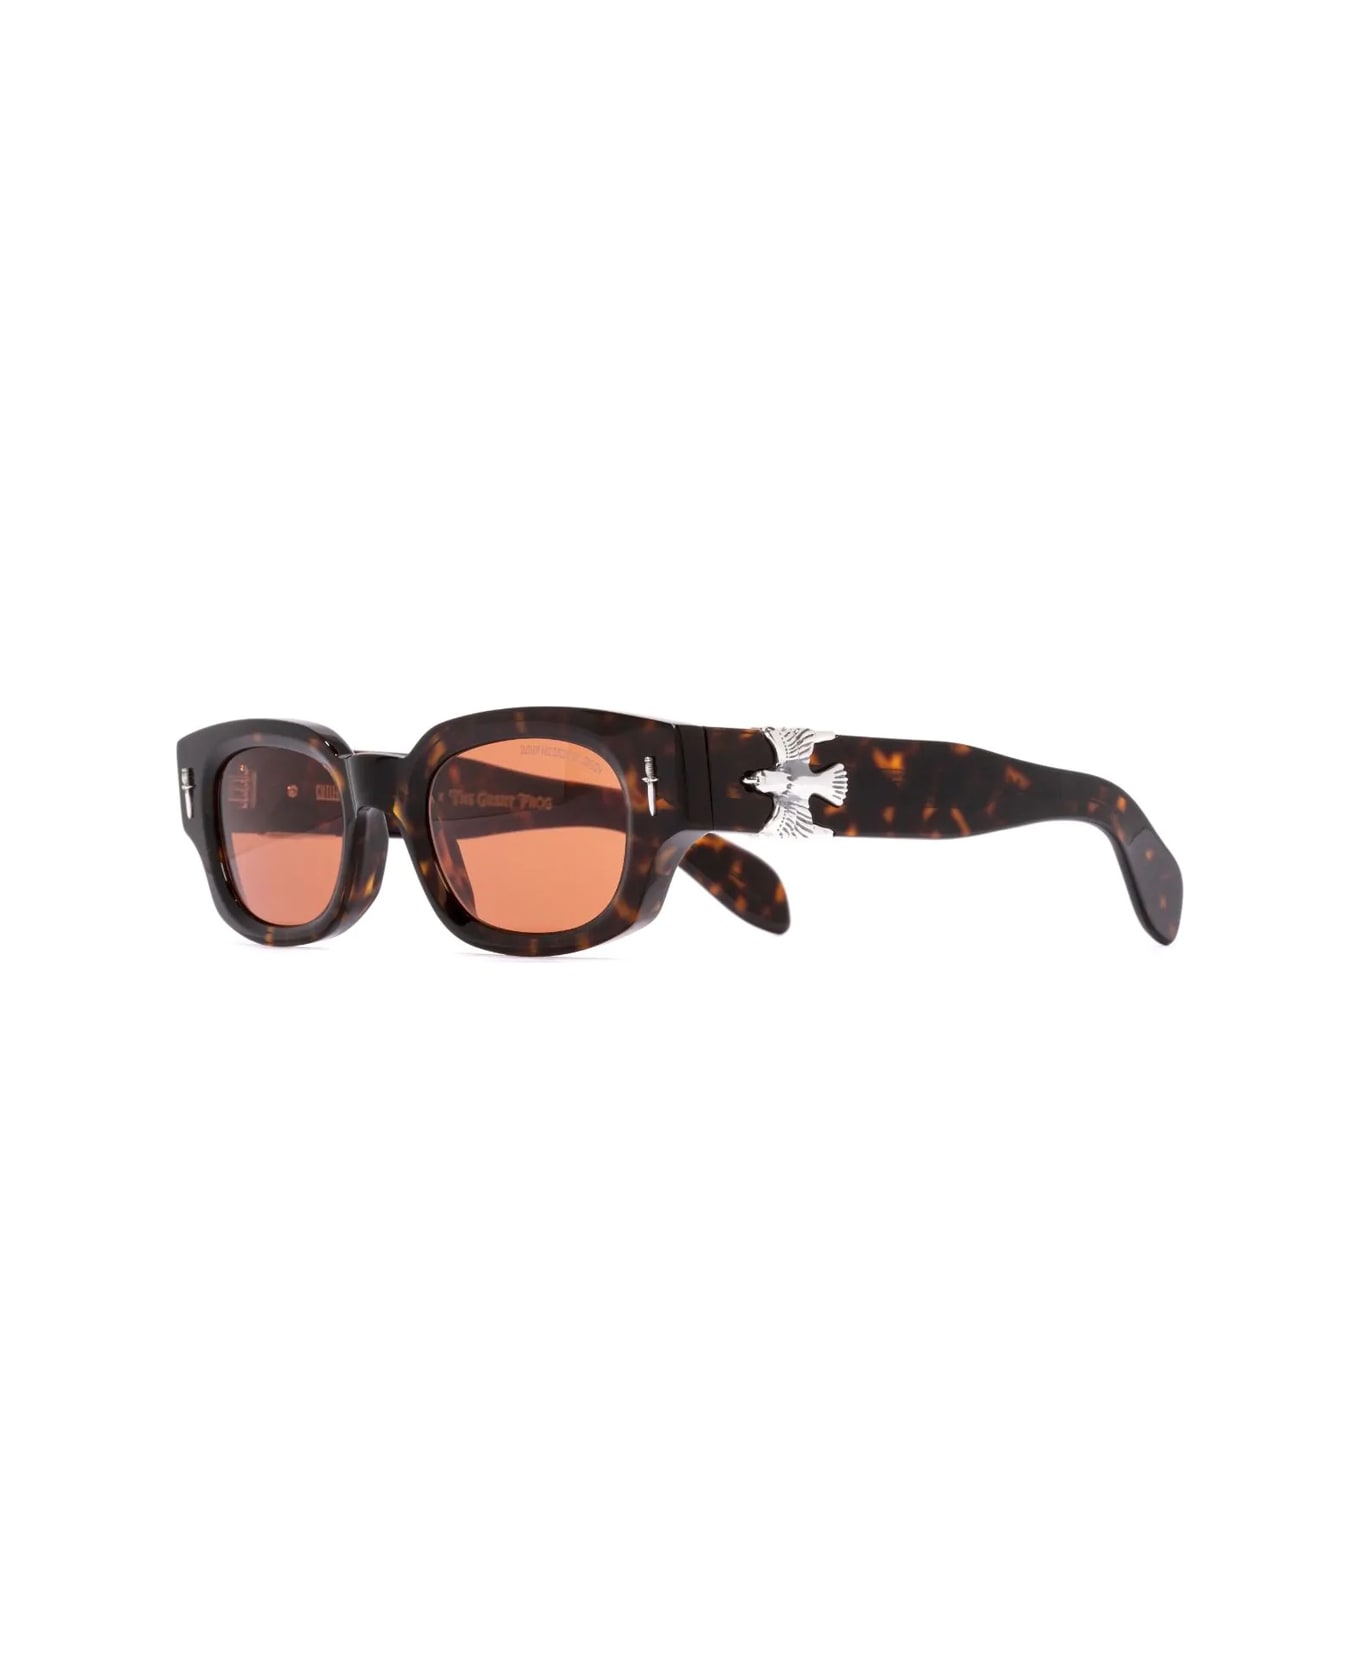 Cutler and Gross Great Frog 004 02 Sunglasses - Marrone サングラス